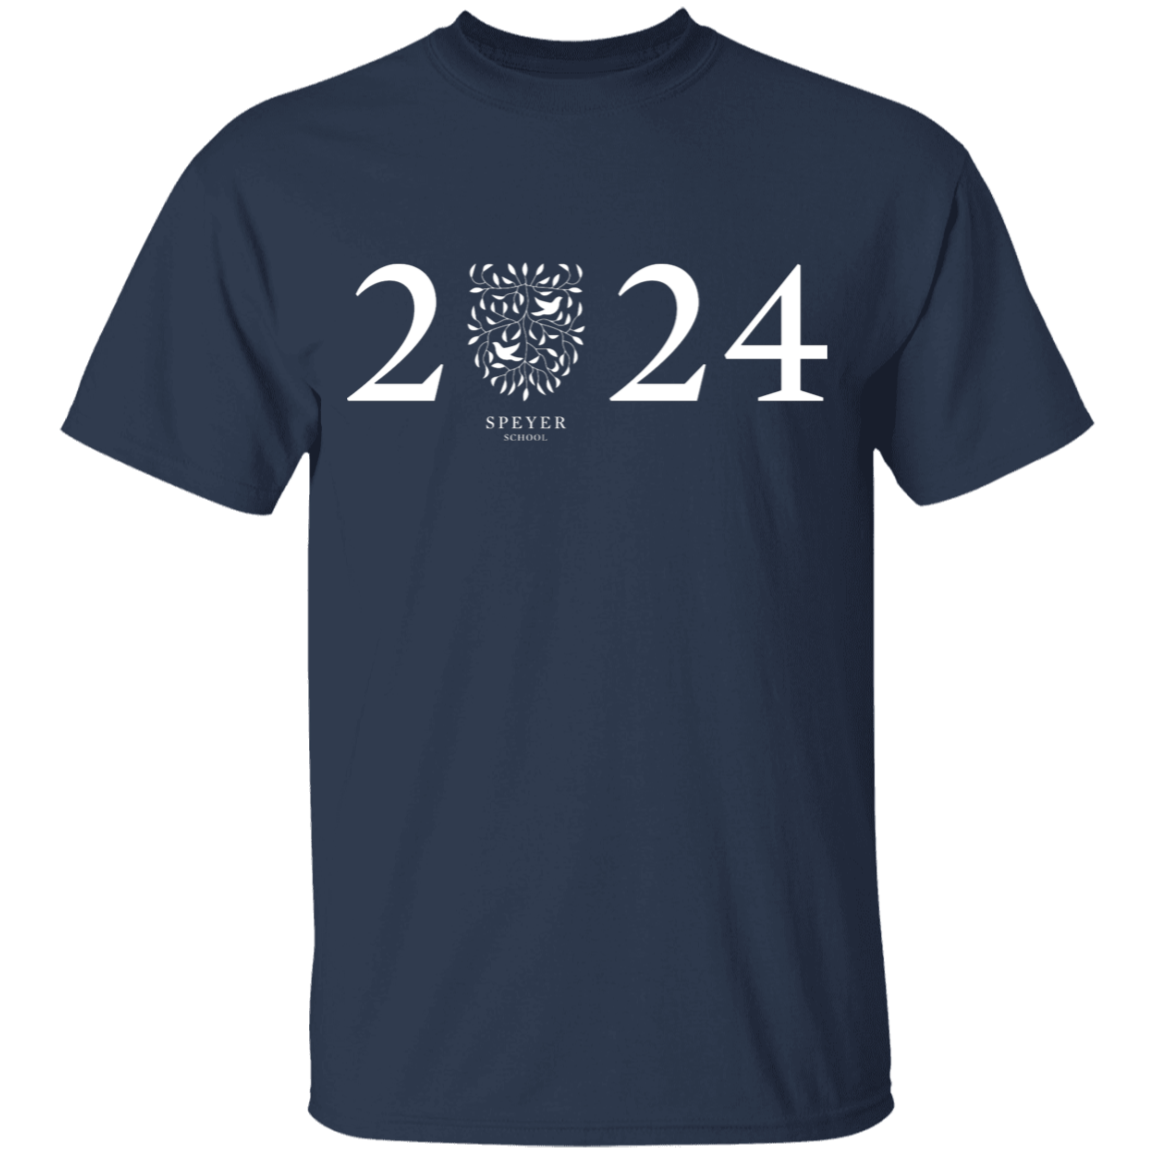 Class of 2024 T-Shirt, Youth Sizes